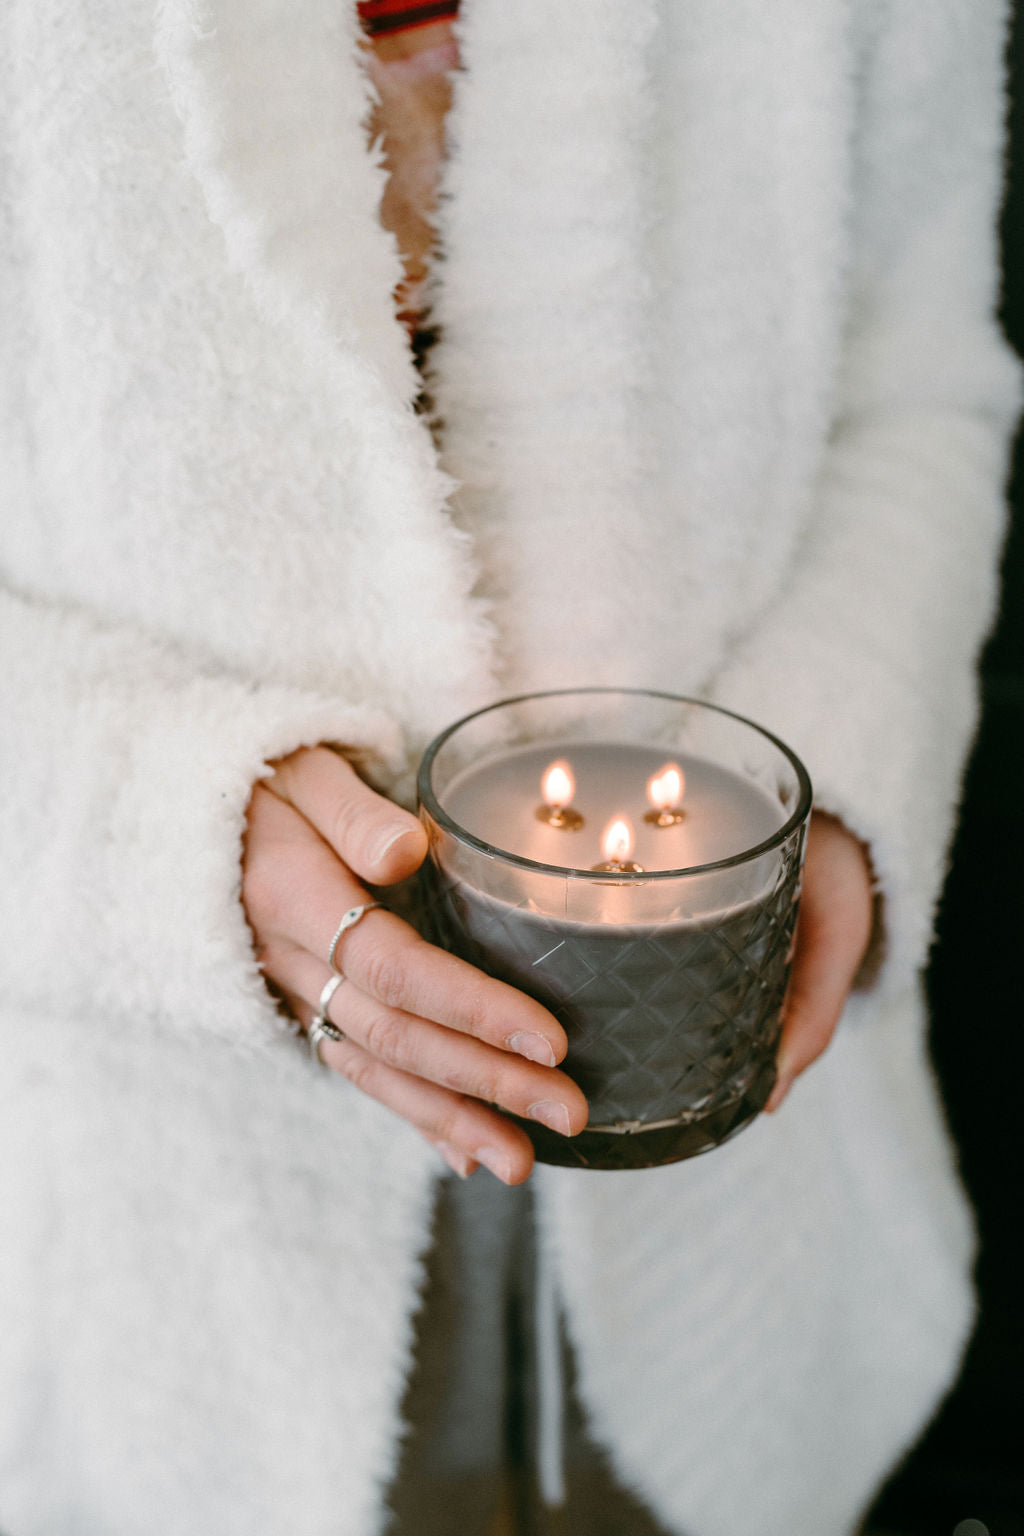 Driftwood candle held with two hands and white fluffy robe.